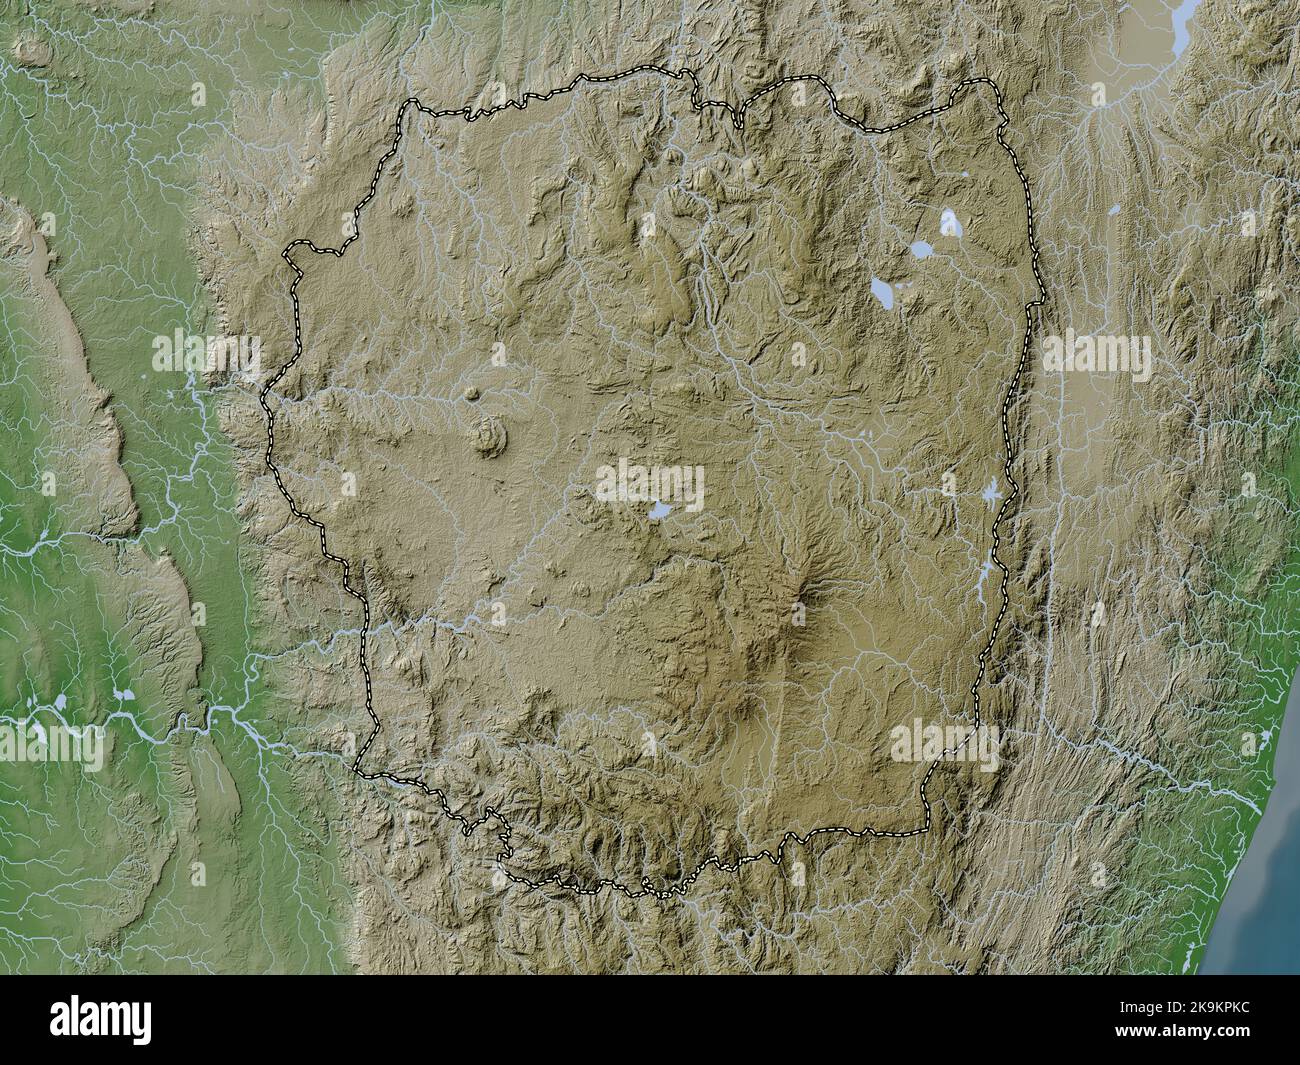 Antananarivo, autonomous province of Madagascar. Elevation map colored in wiki style with lakes and rivers Stock Photo